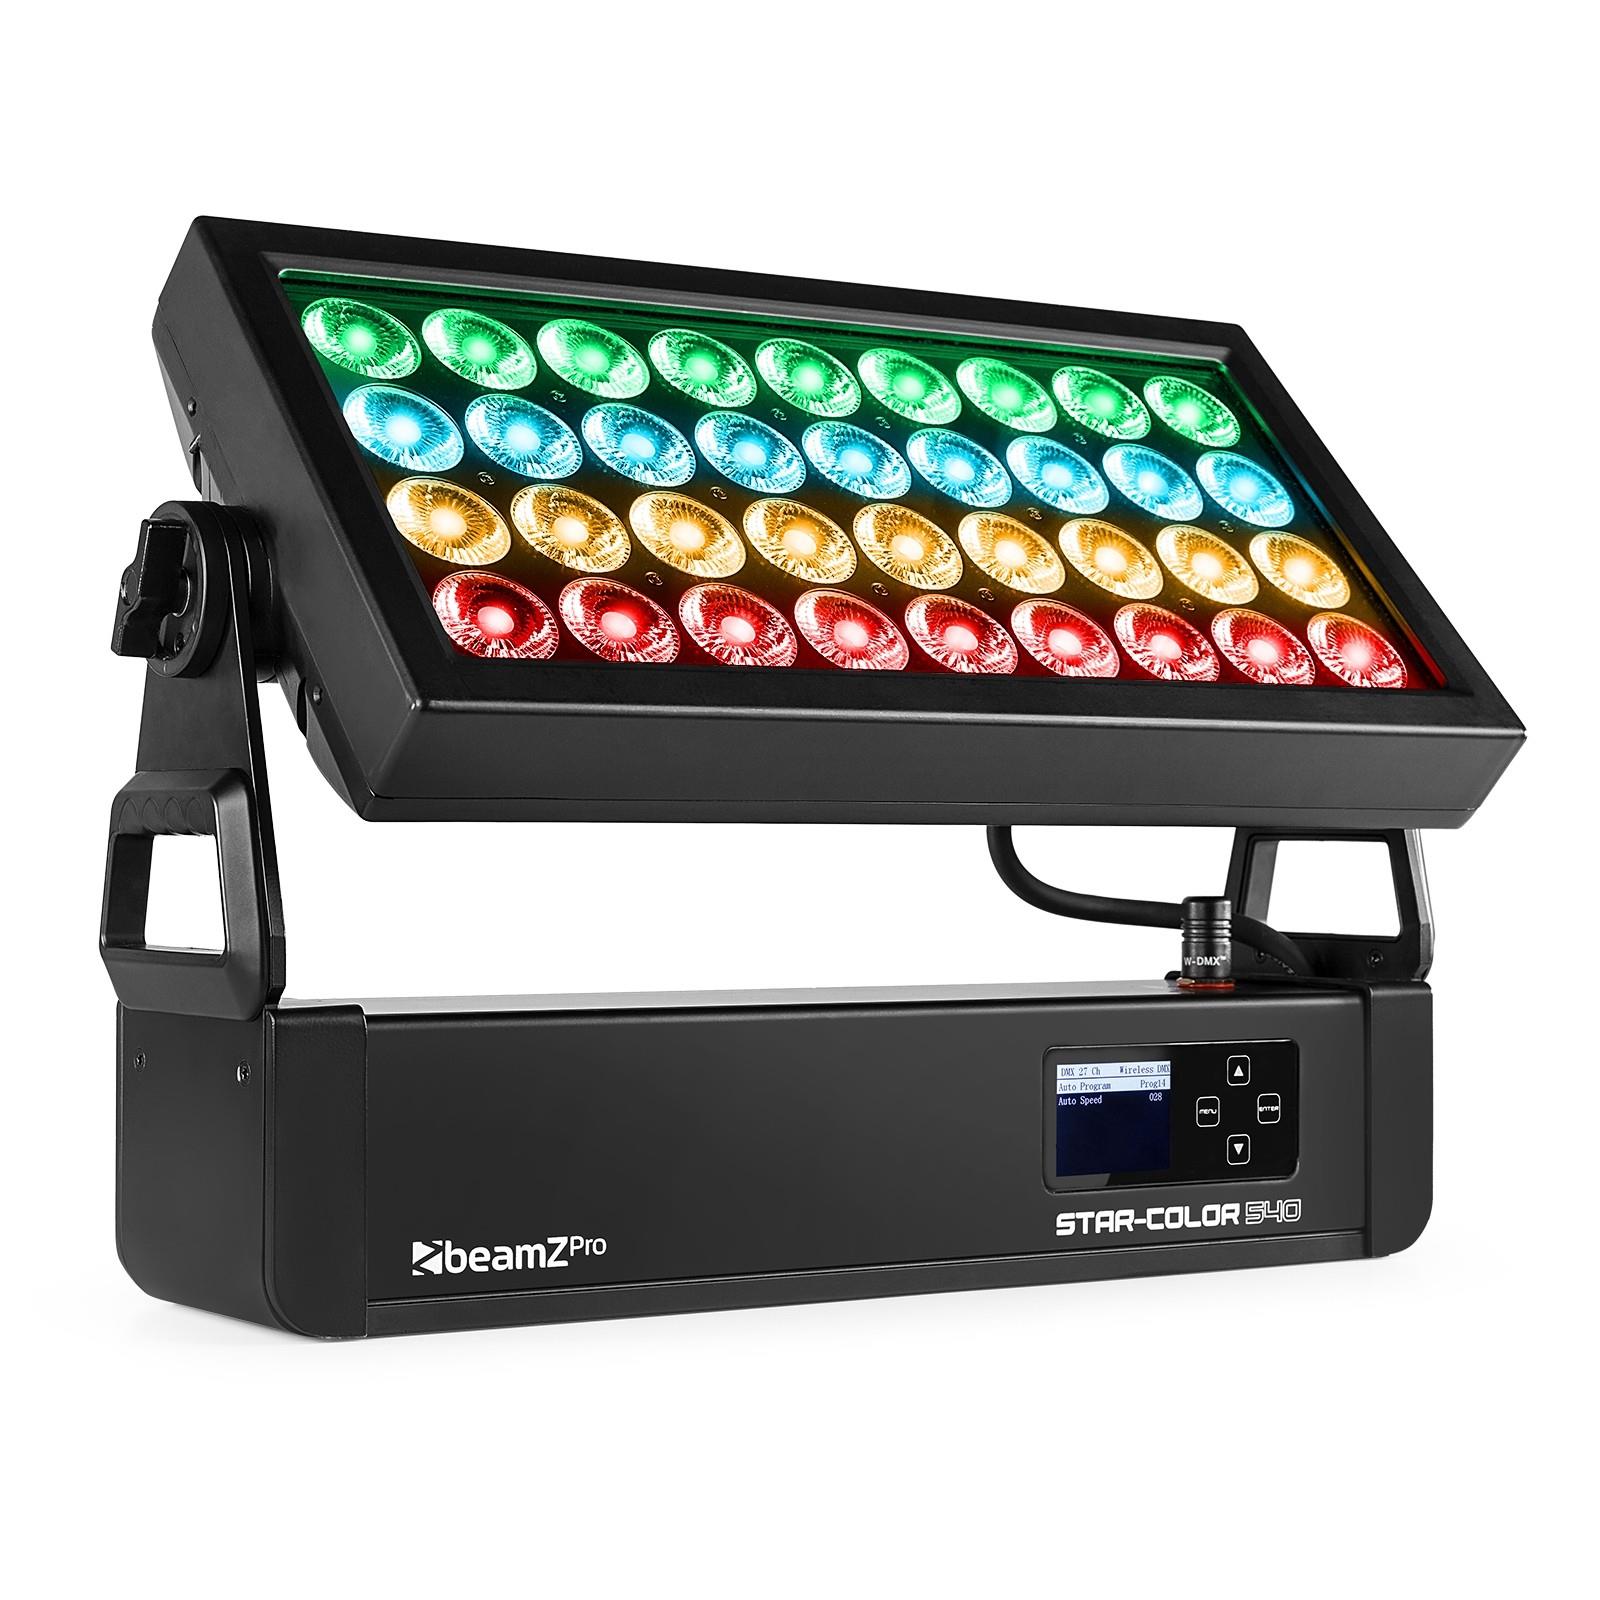 PROJECTOR BEAMZ STARCOLOR 540 WASH 36X15W